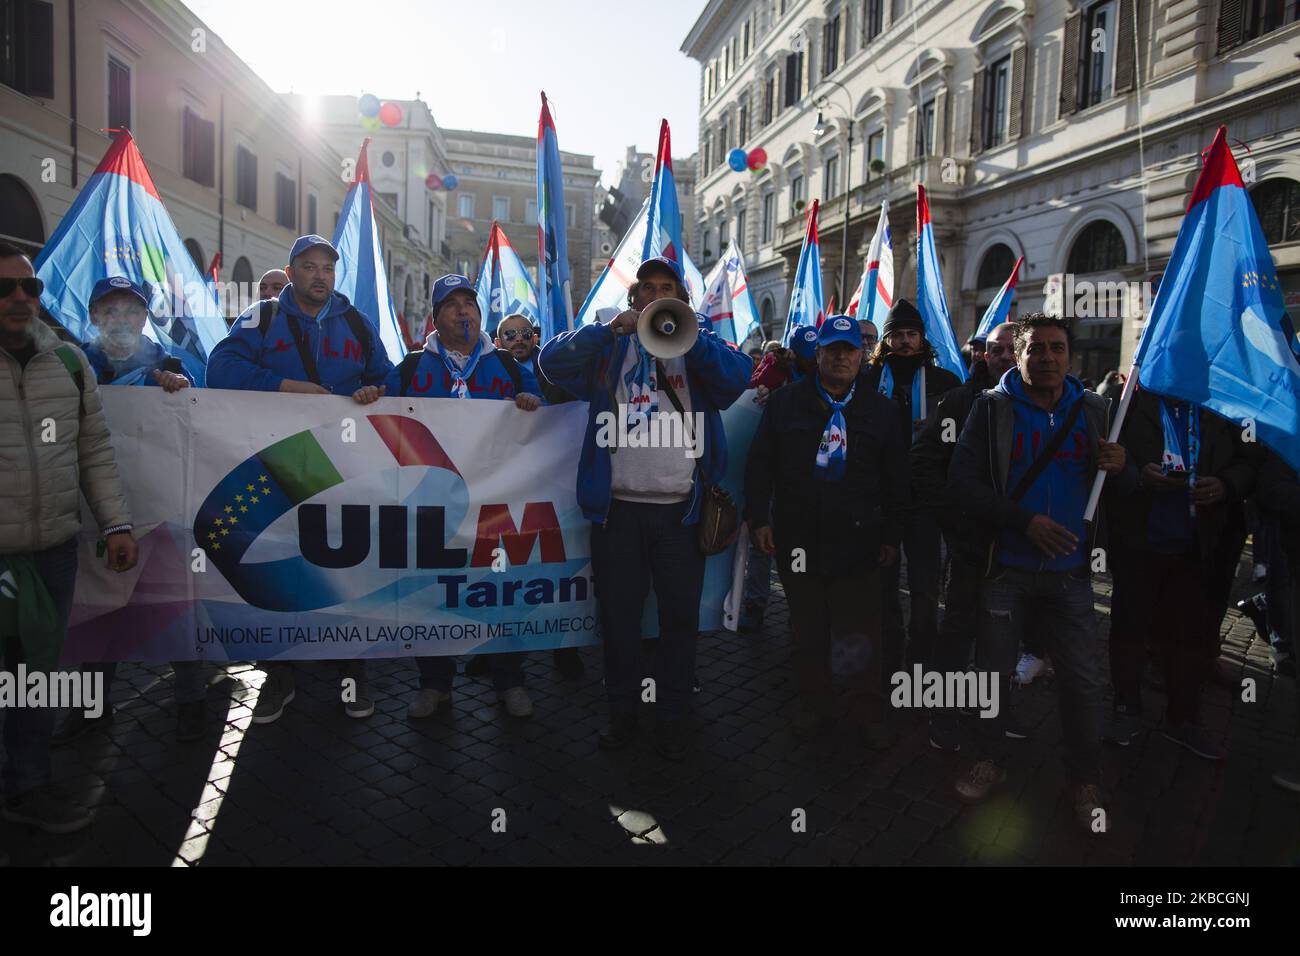 Hundreds of Ilva workers from Taranto protest in Piazza Santi Apostoli in Rome, Italy, on December 10, 2019.Workers from the FIOM metalworkers union joined other workers and unions from all sectors coming from all over Italy against the industrial crisis and the closure of factories as the Italian government is negotiating a new plan with the world's biggest steelmaker ArcelorMittal to save the Taranto steel plant. (Photo by Christian Minelli/NurPhoto) Stock Photo